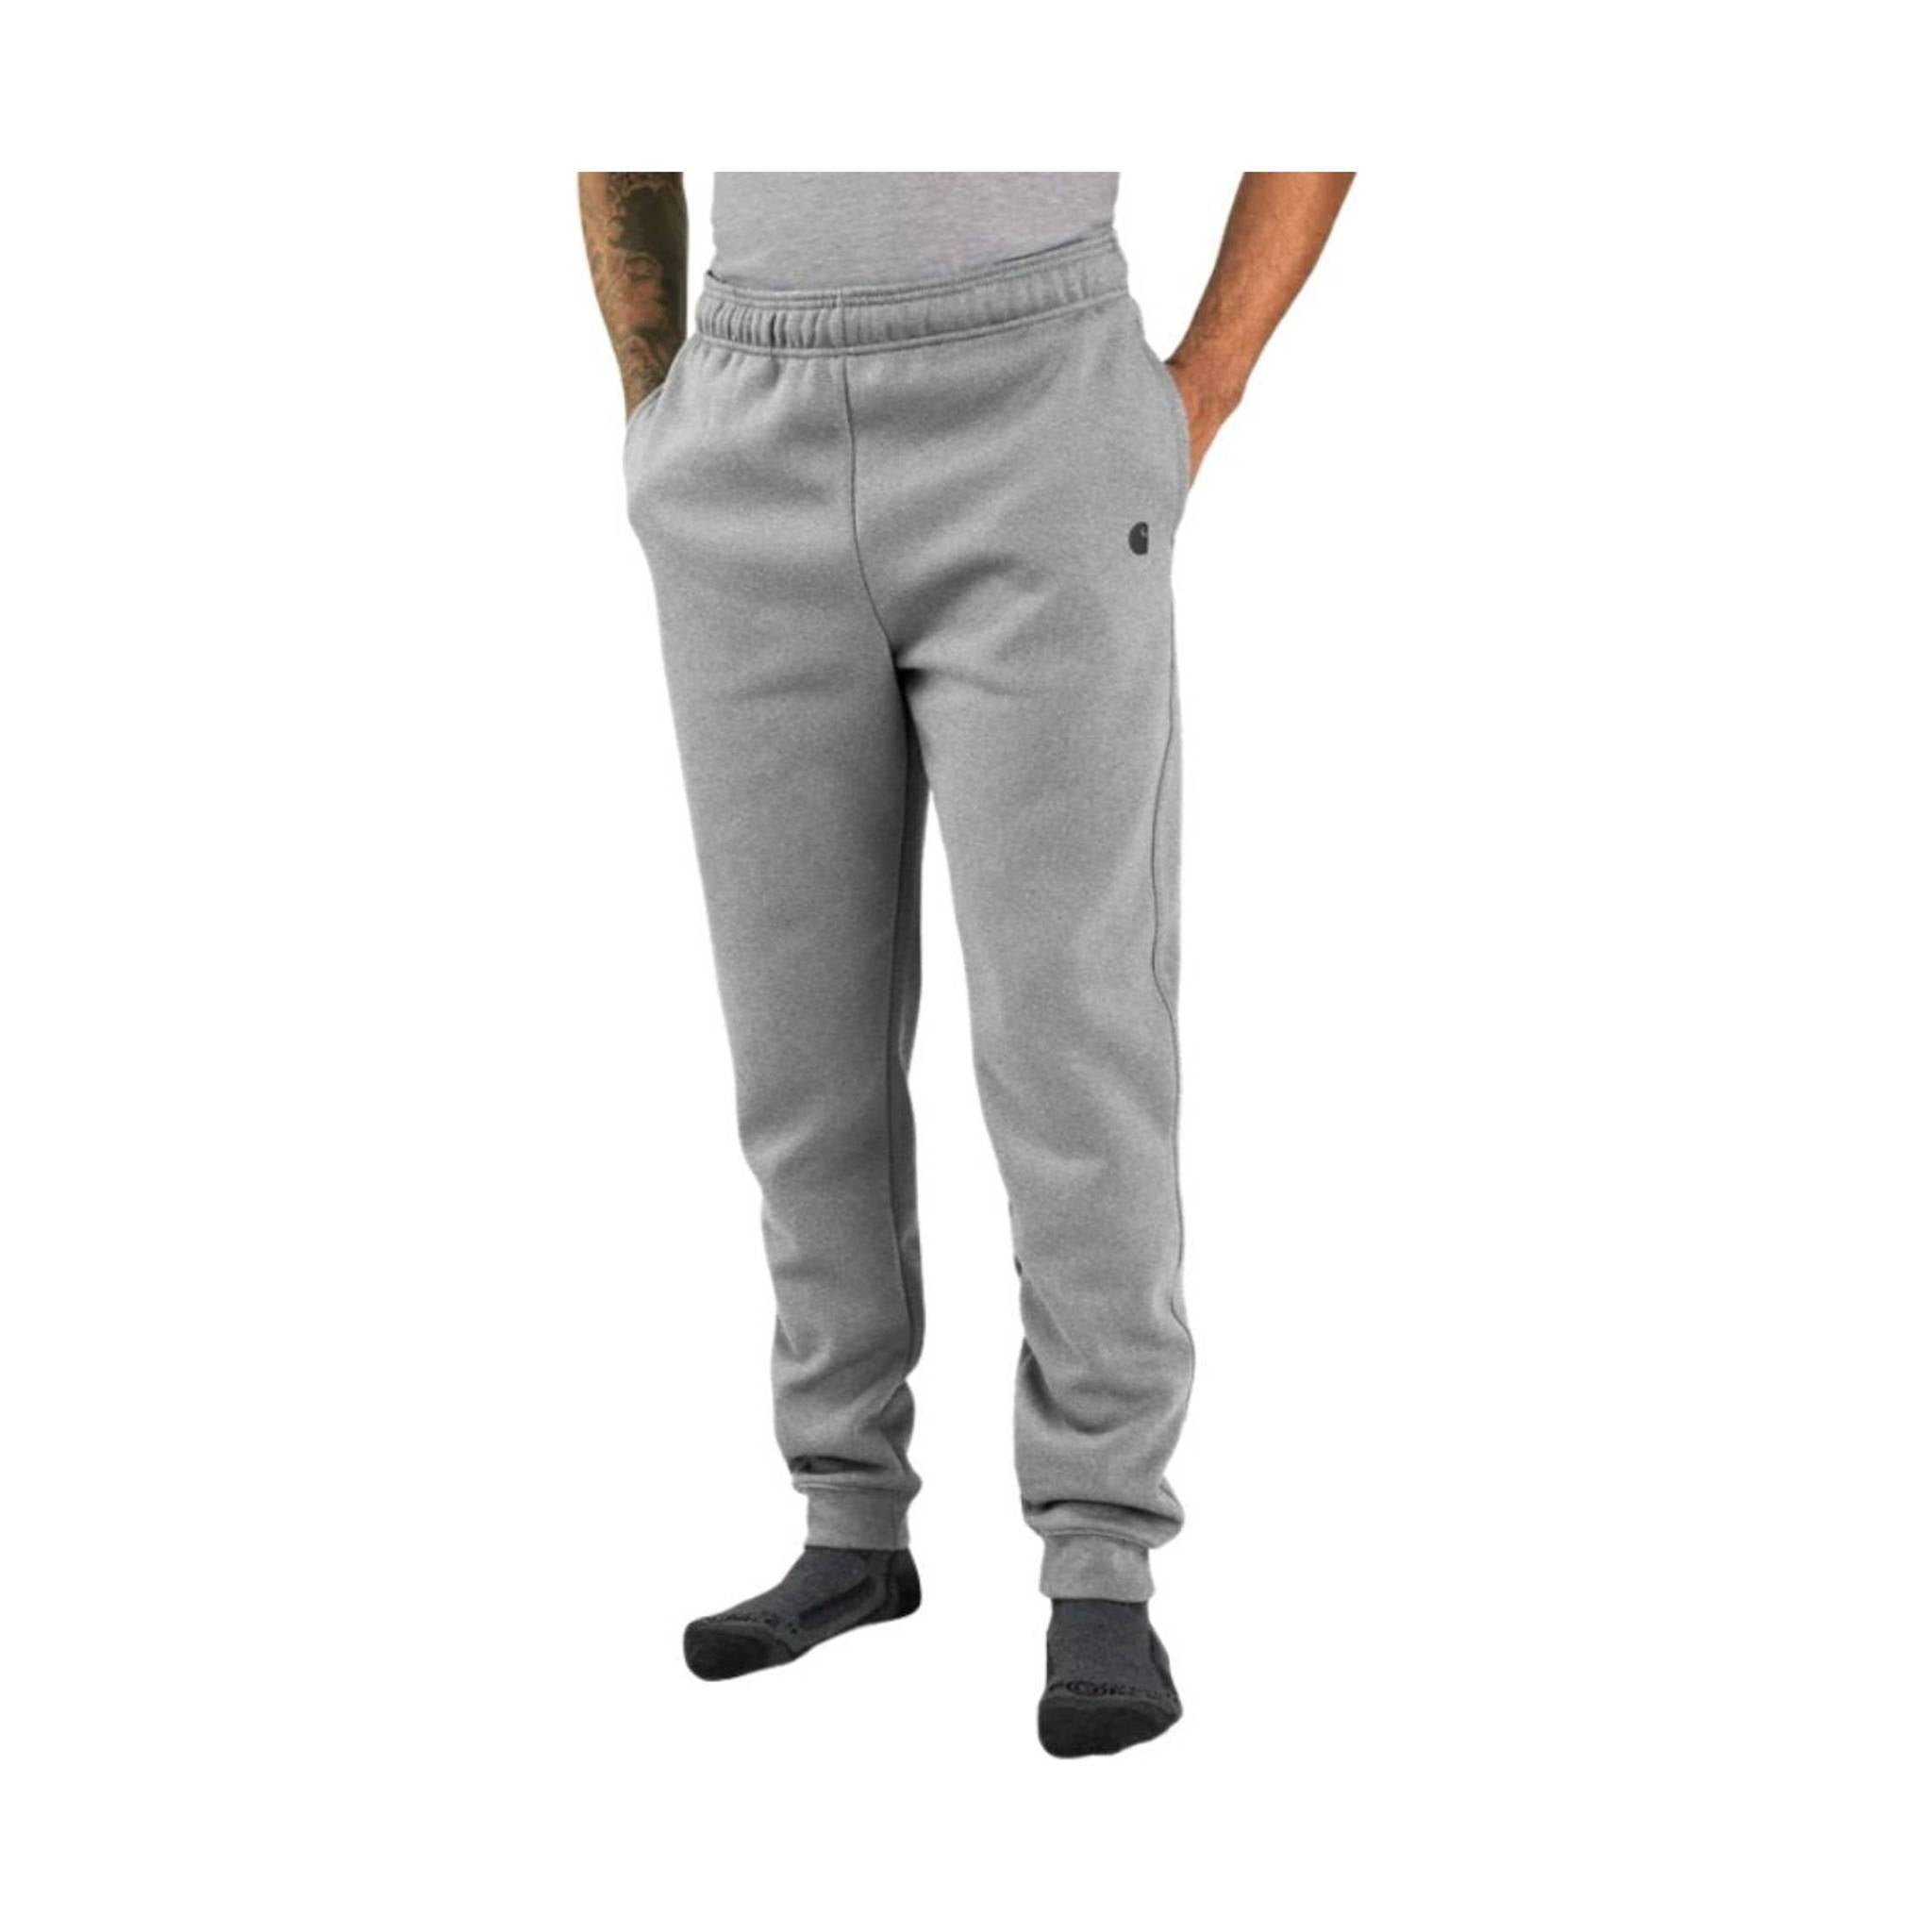 Carhartt Men's Loose Fit Midweight Tapered Sweatpants - Heather Gray